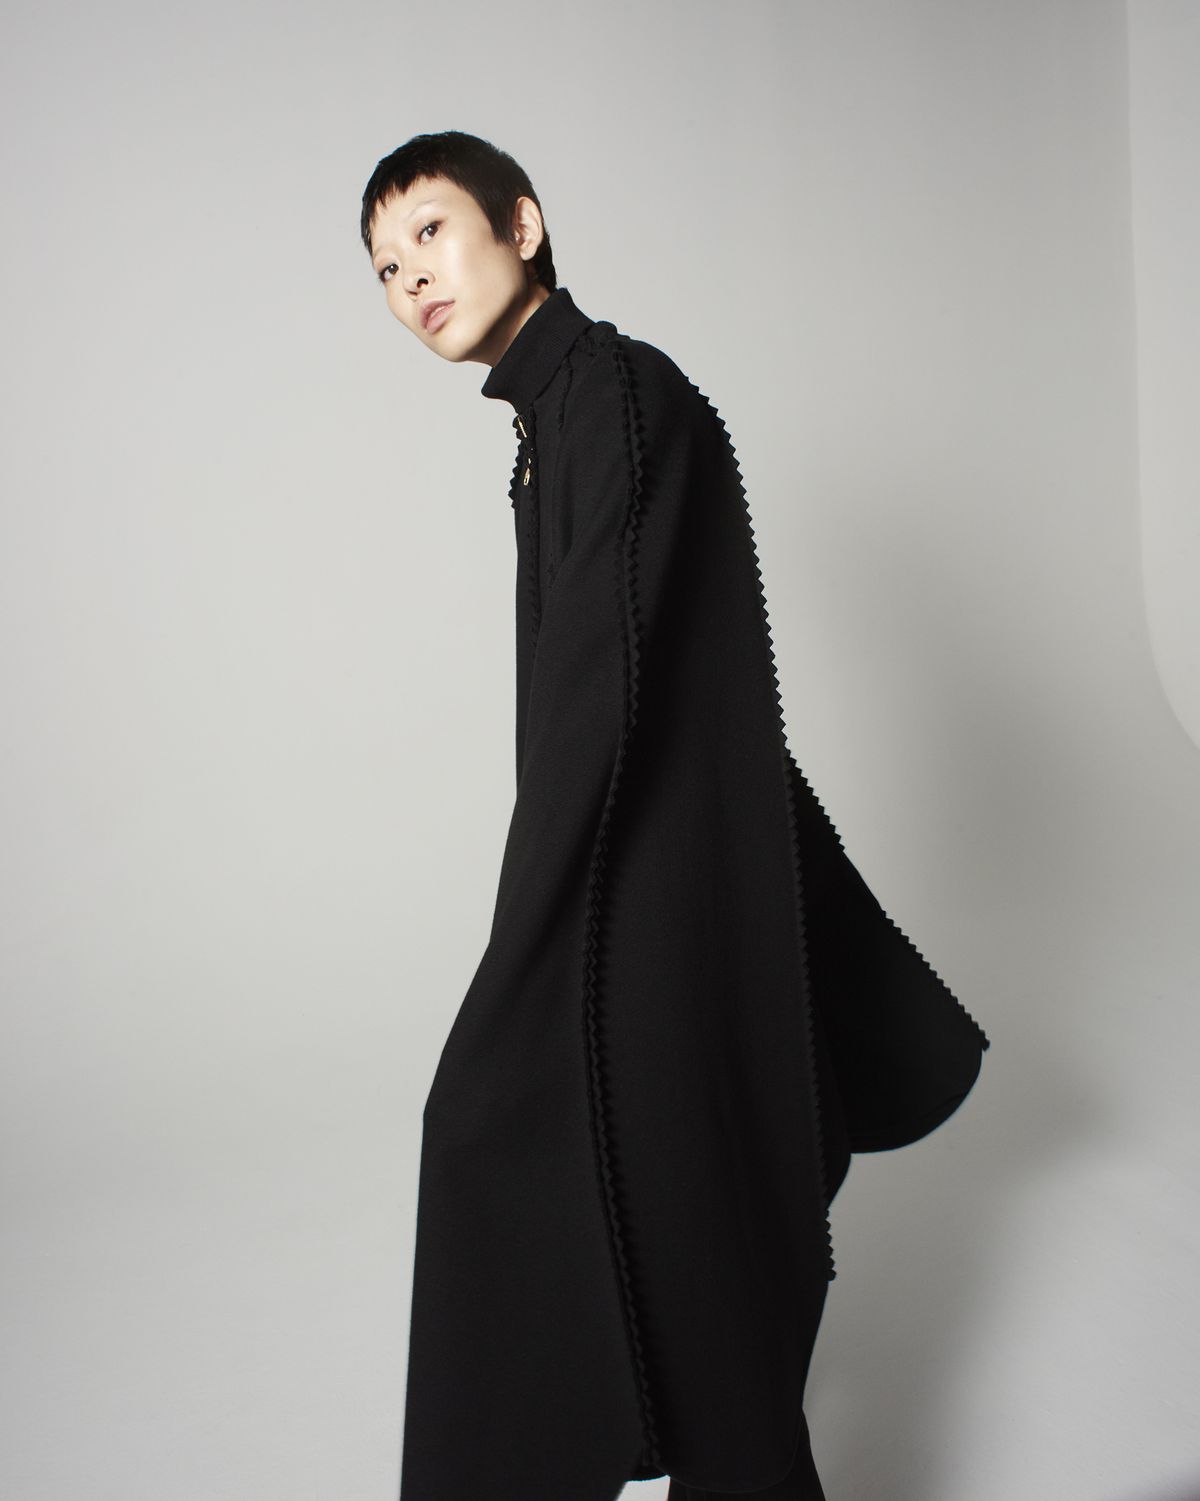 A model with short hair wearing a black cape